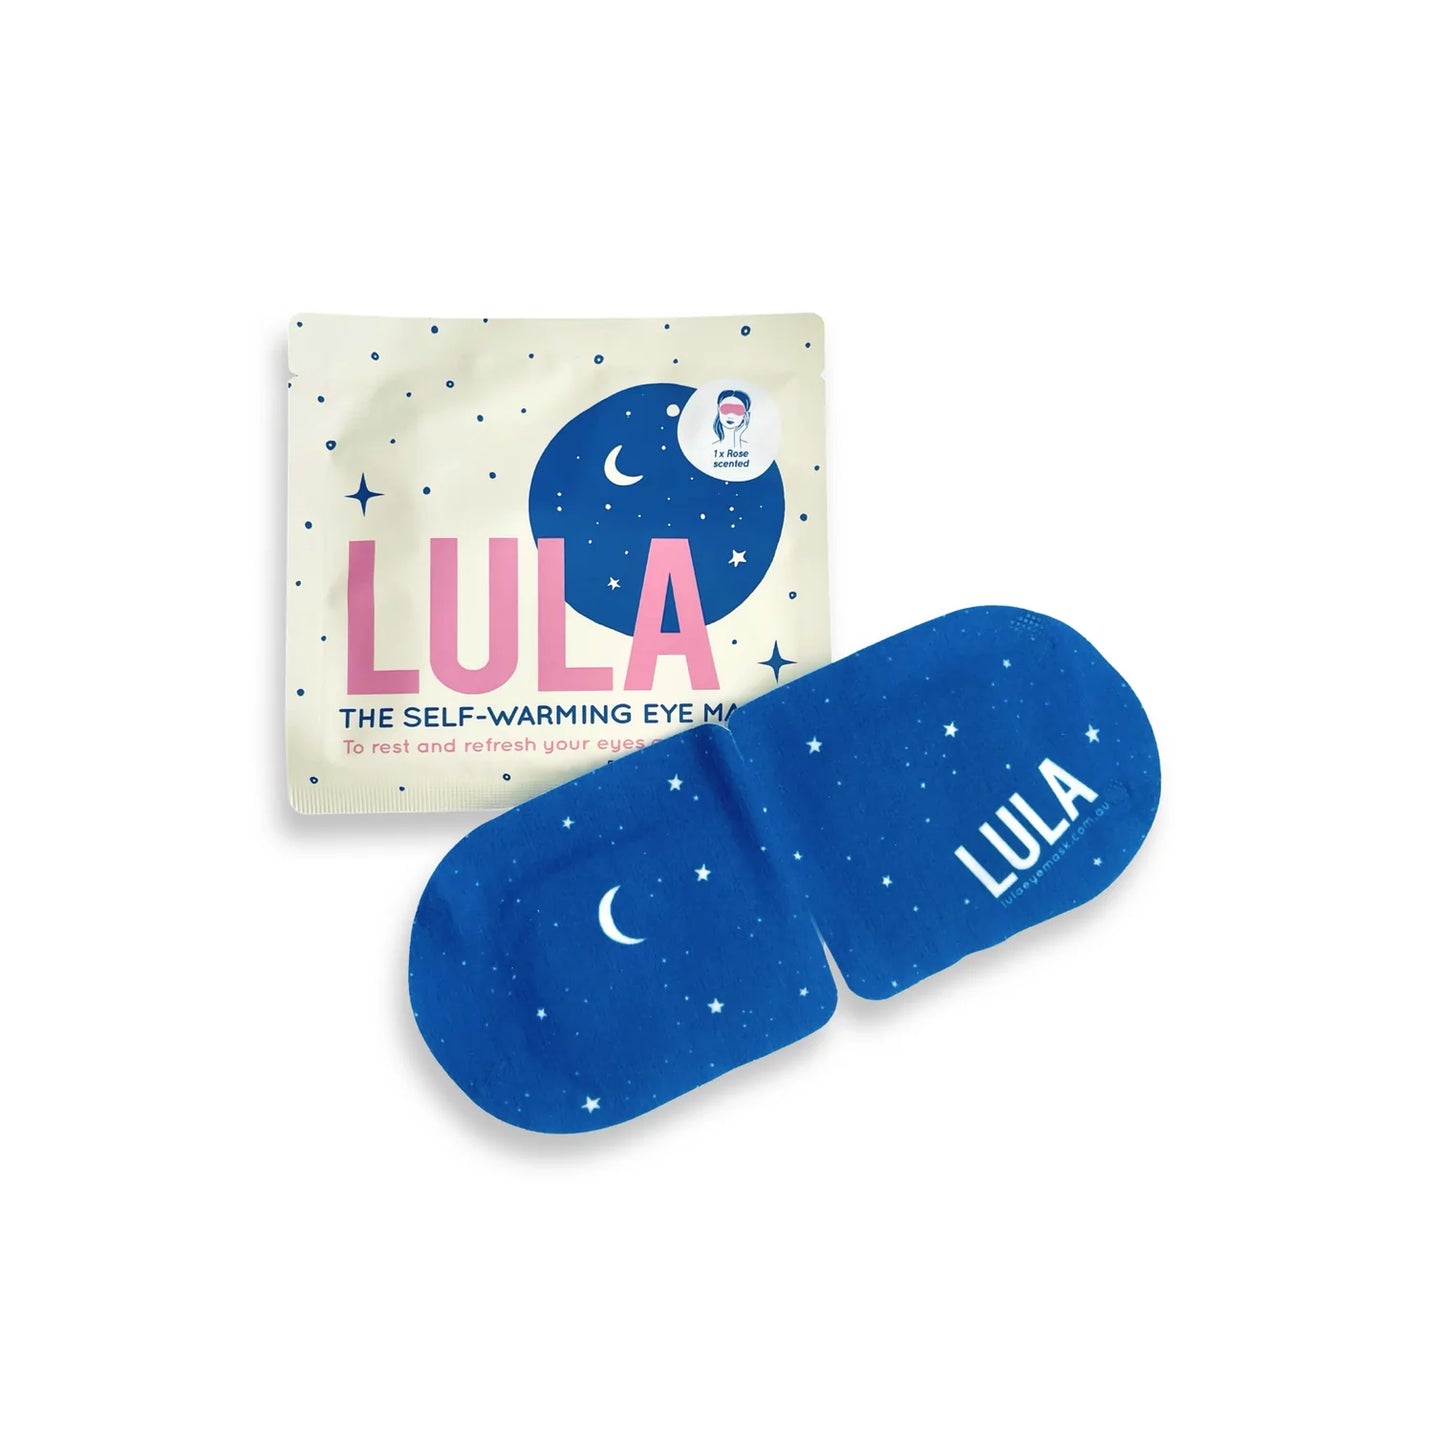 Rose Like a warm hug for your eyes and mind. Rest your eyes with Australia's first self-warming eye mask. When you open a Lula Eye Mask the magical self-warming process begins!